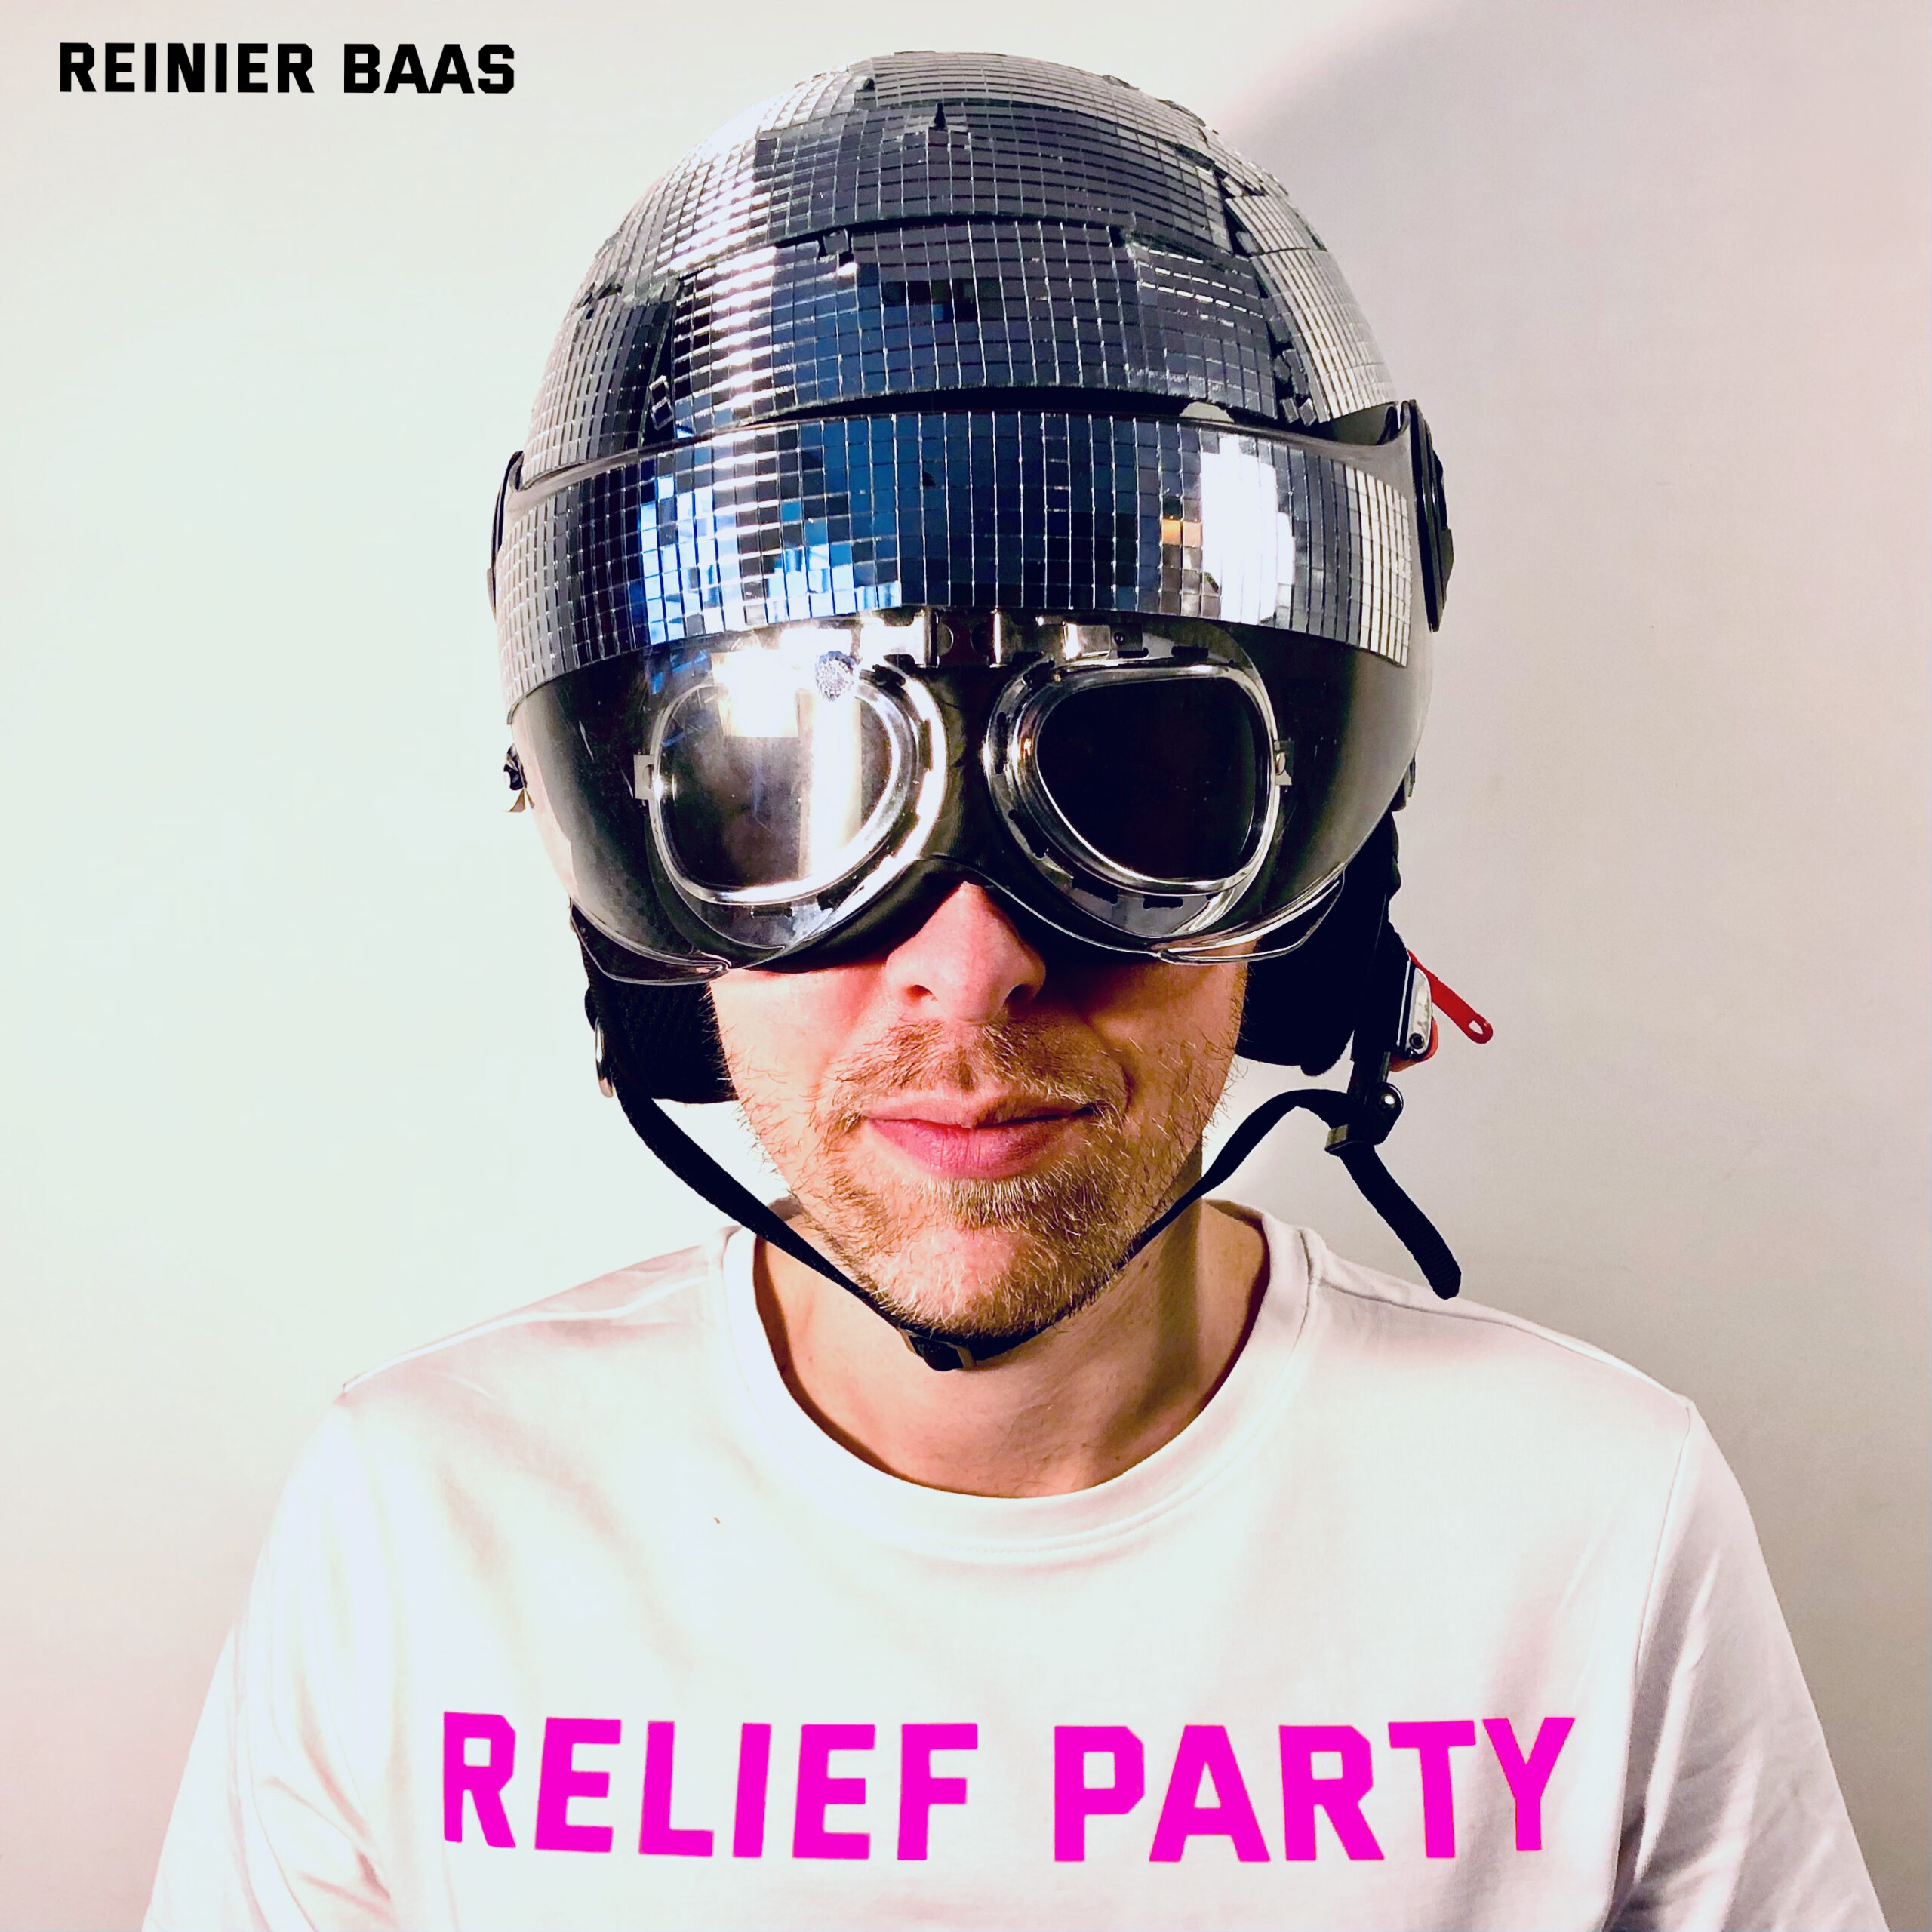 Album cover featuring Reinier Baas with a reflective disco ball helmet and aviator goggles, titled 'RELIEF PARTY' in pink capital letters on a white T-shirt